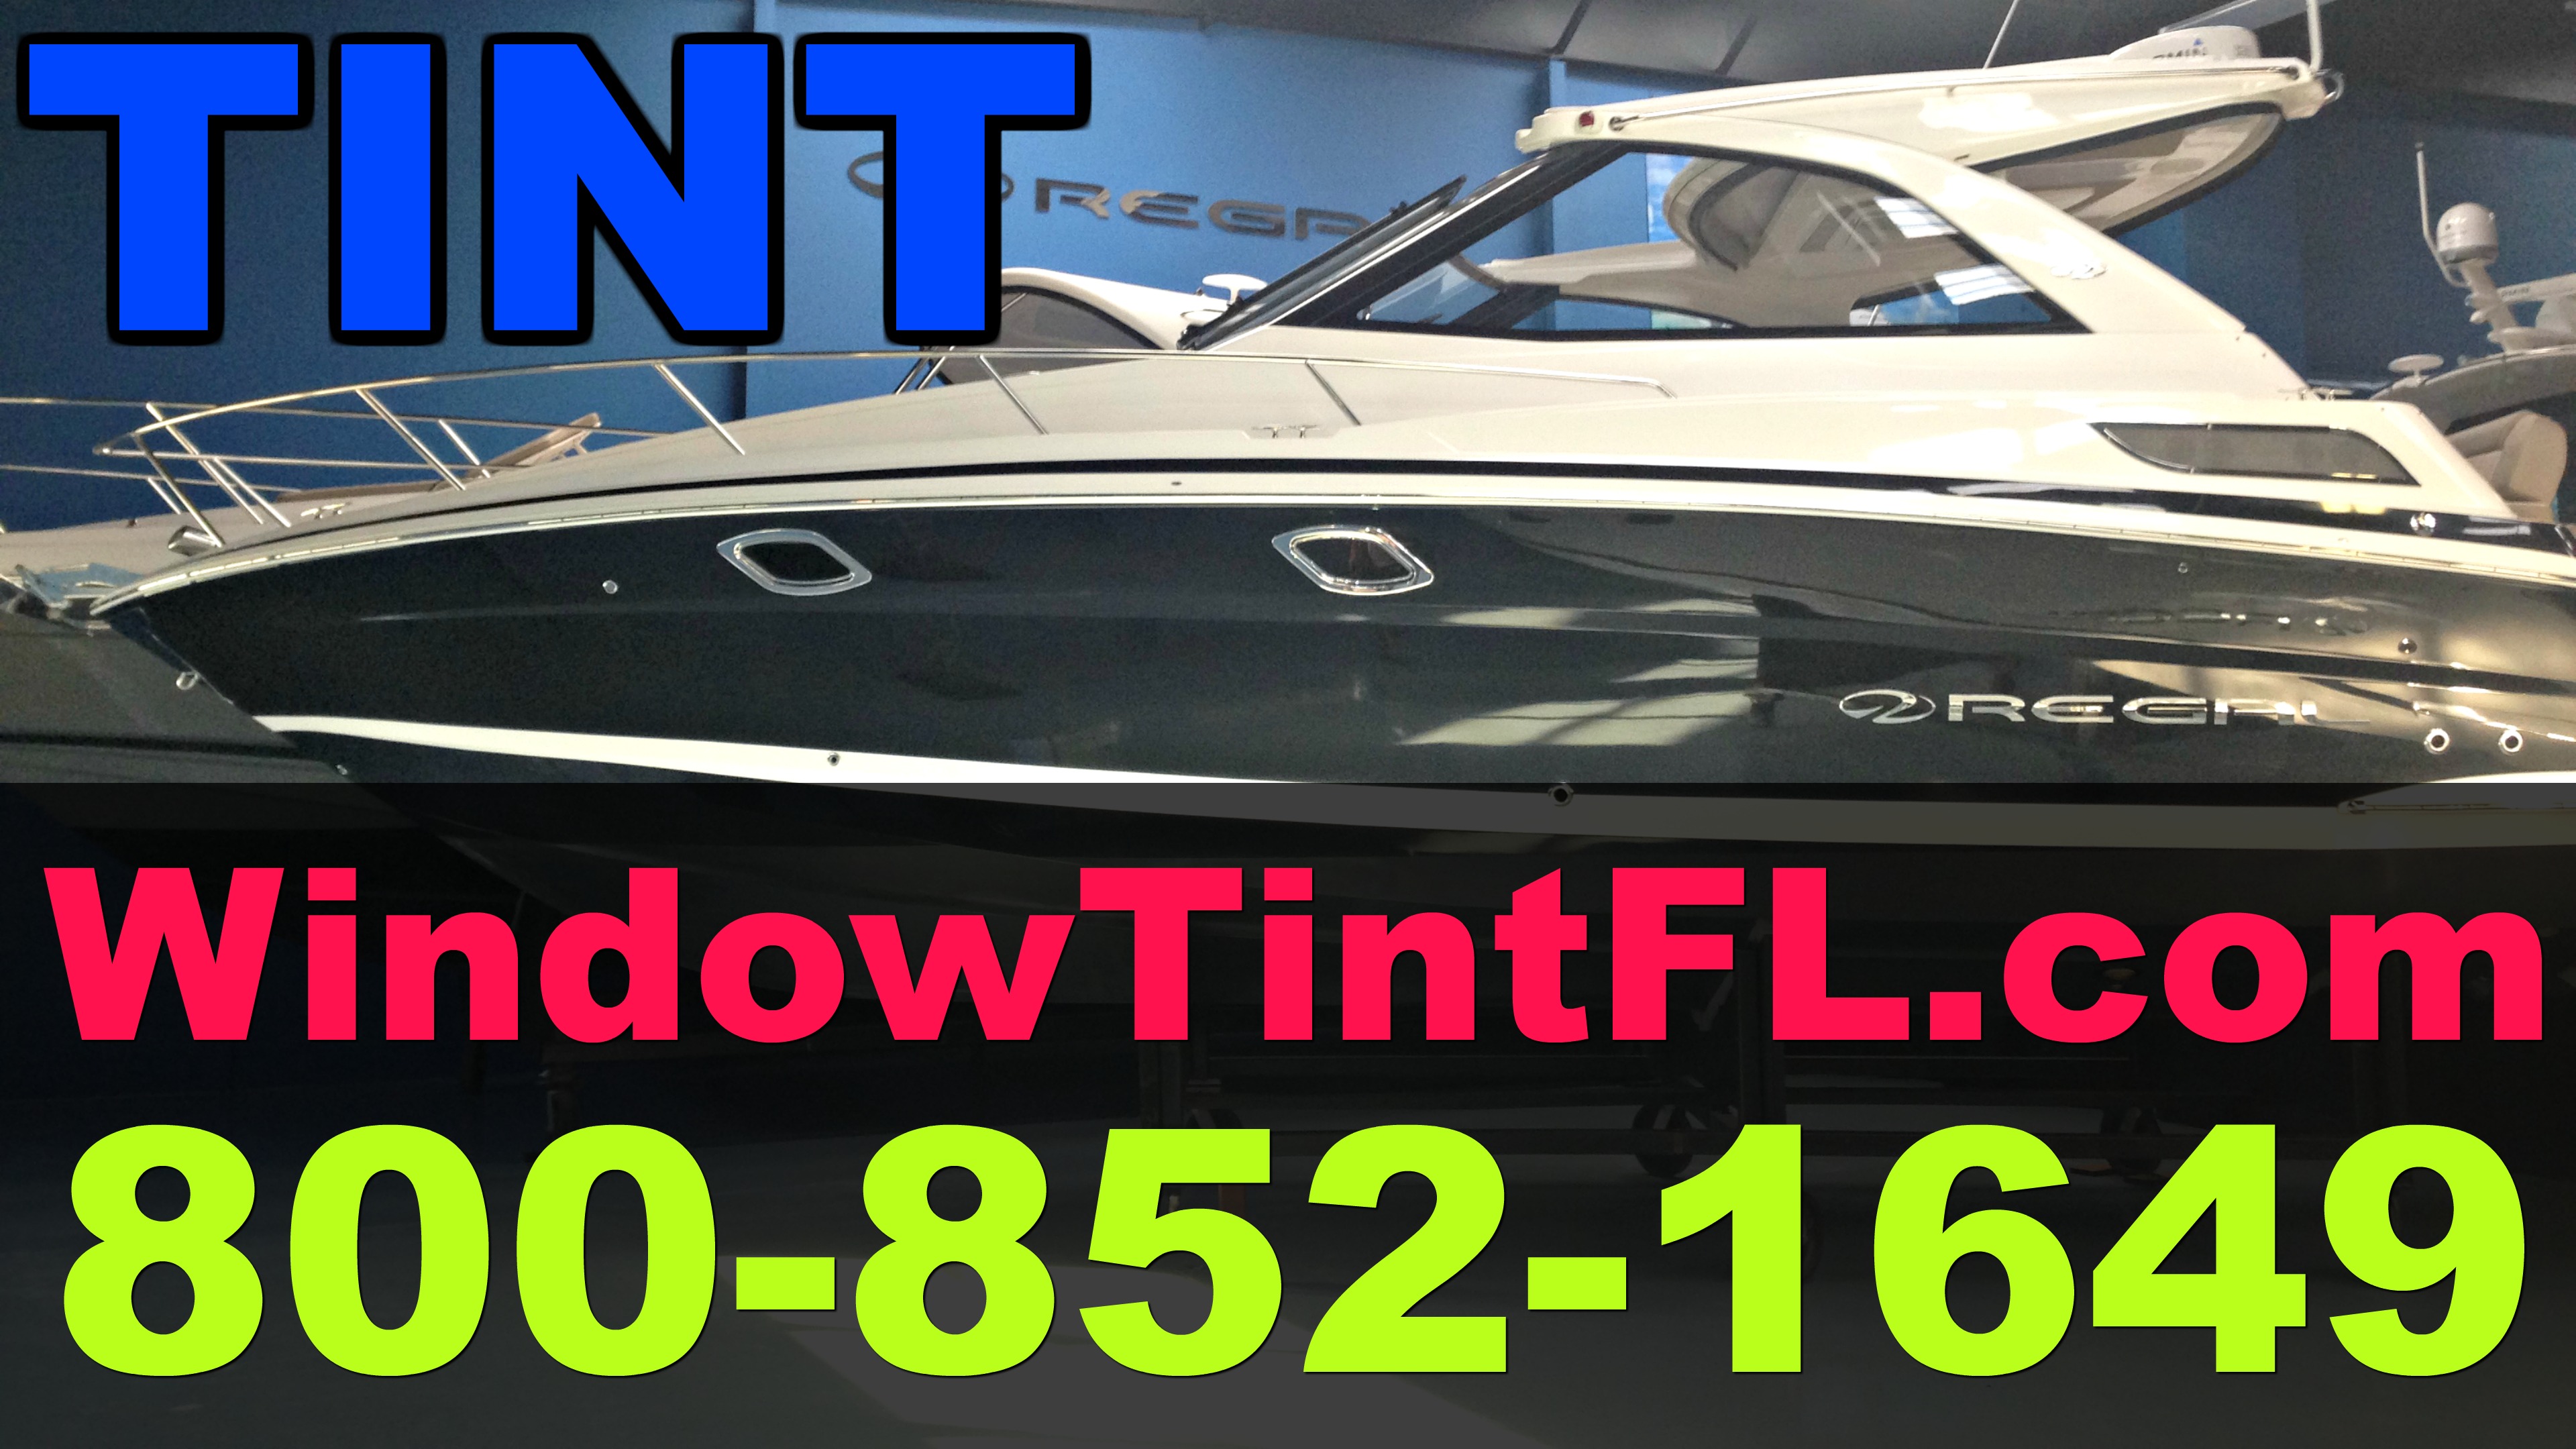 Best Boat Window Tint in Clearwater Florida